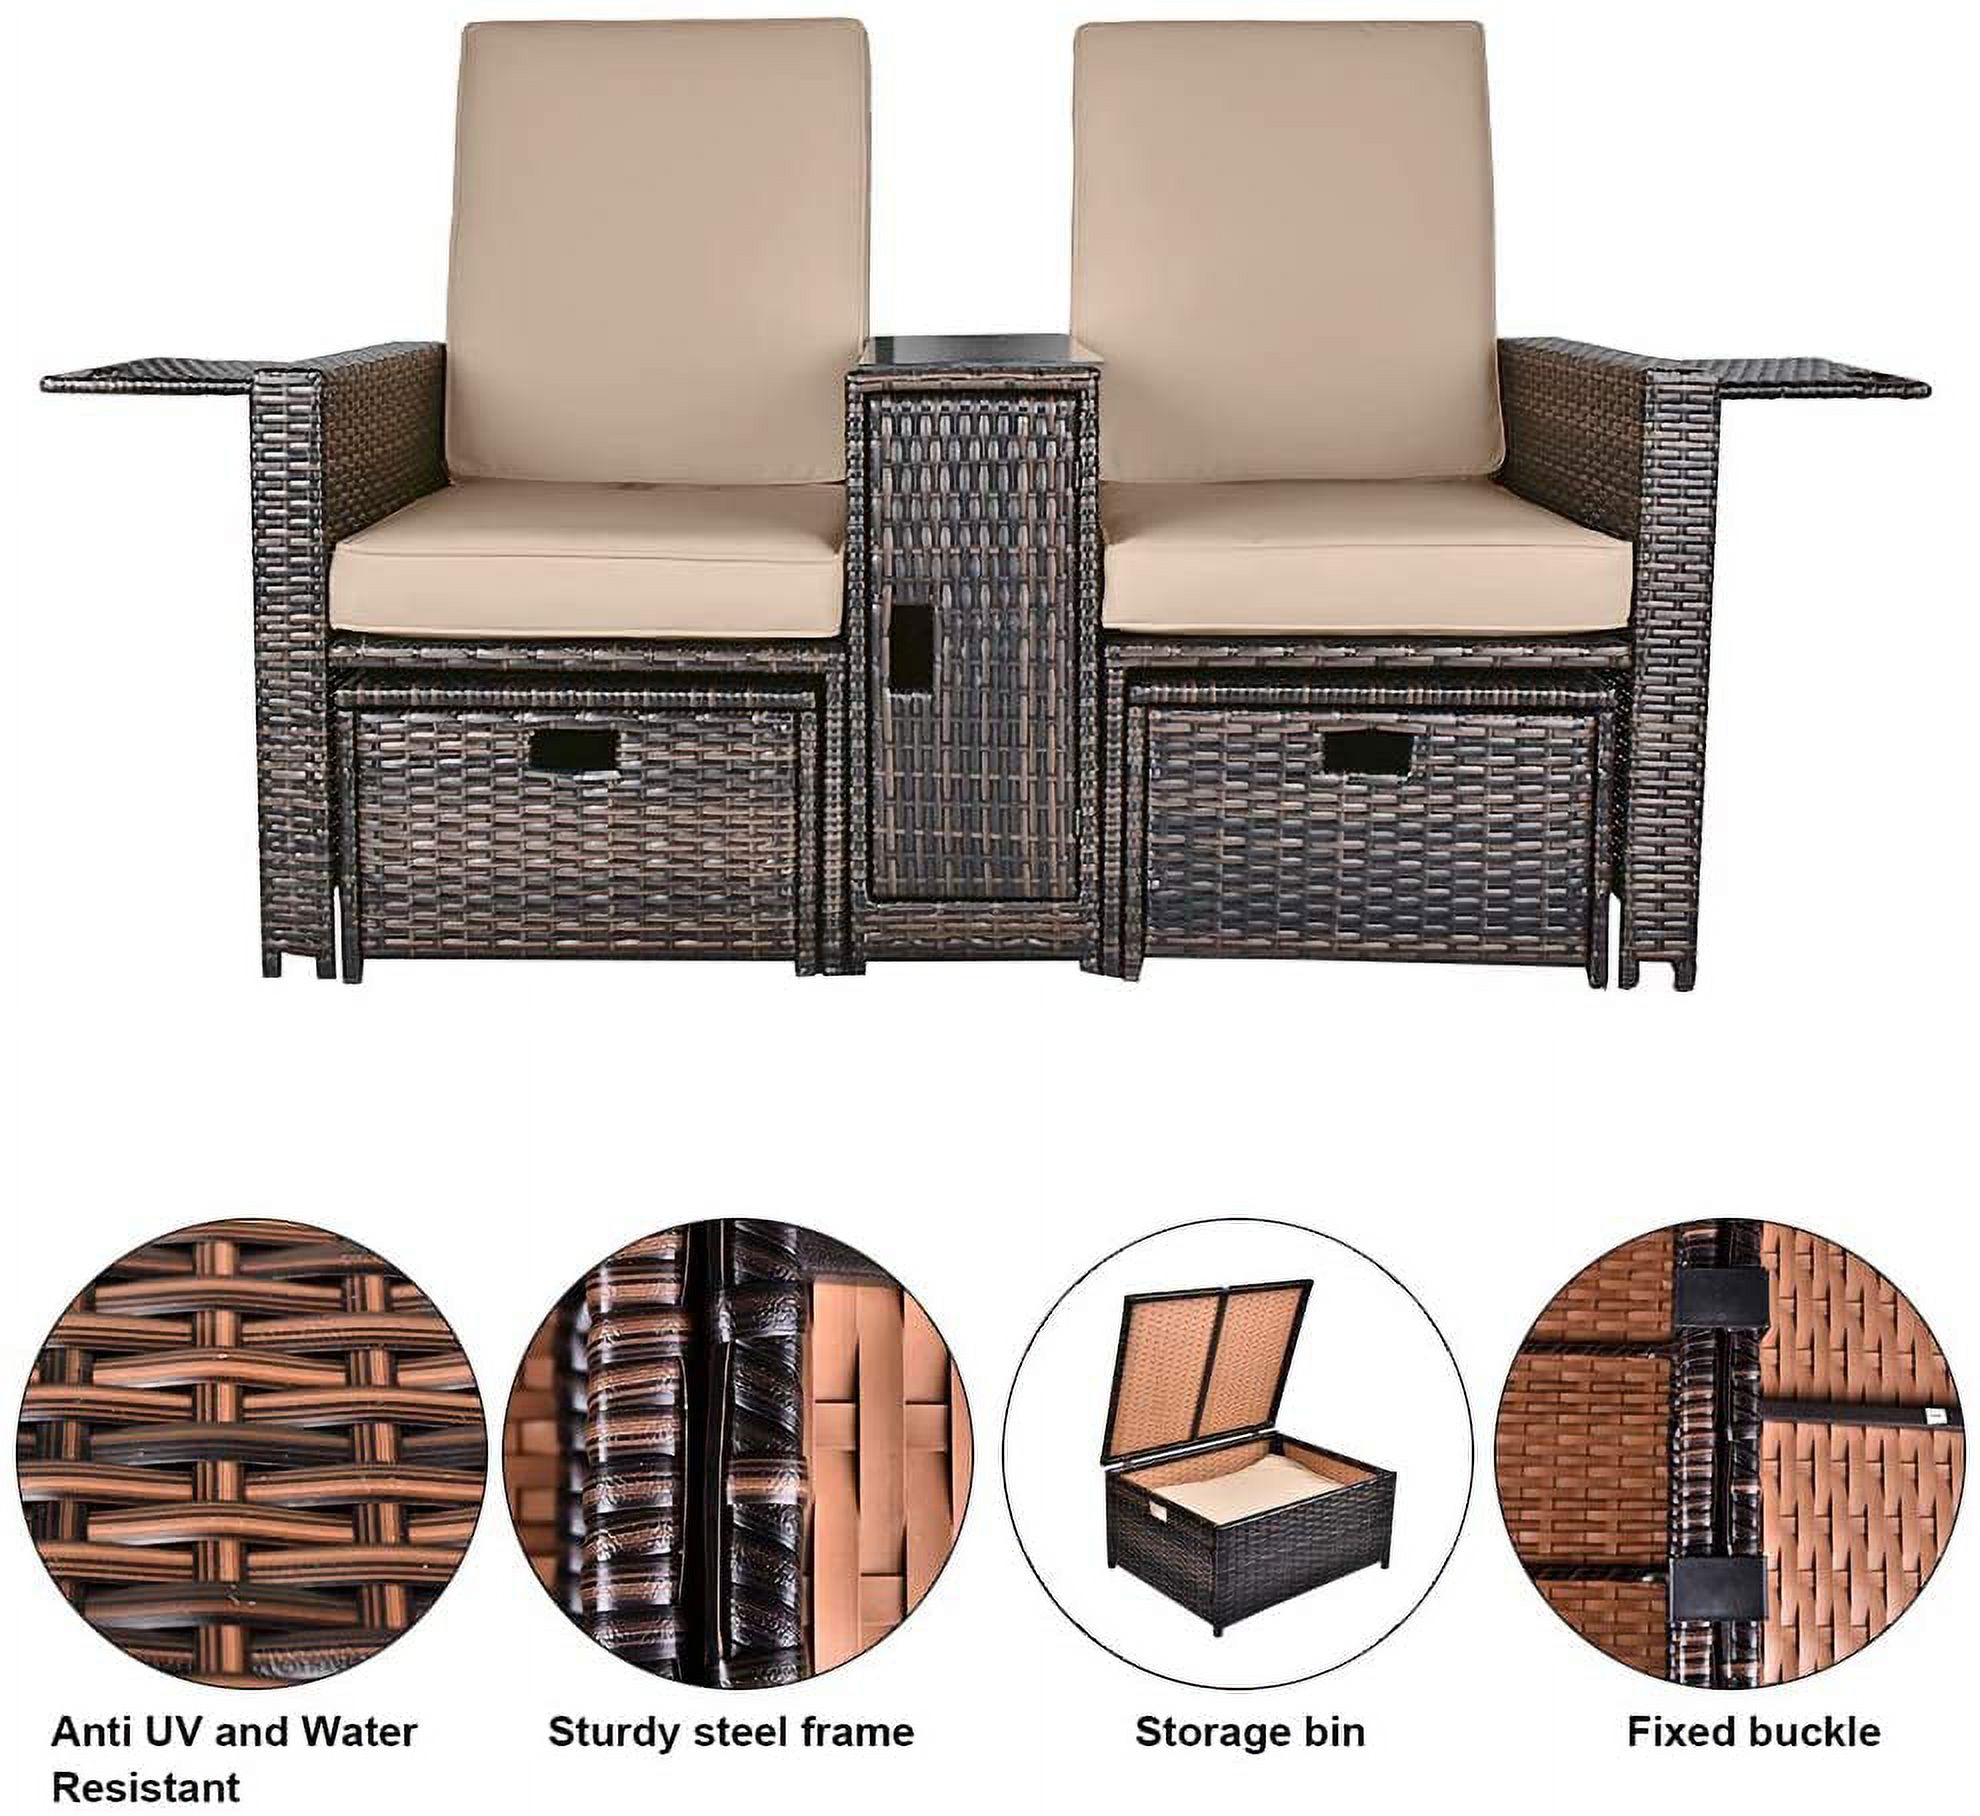 LVUYOYO 5pcs Patio Wicker Loveseat - Outdoor Rattan Sofa Set with Cushion - Wicker Furniture for Garden - image 4 of 7